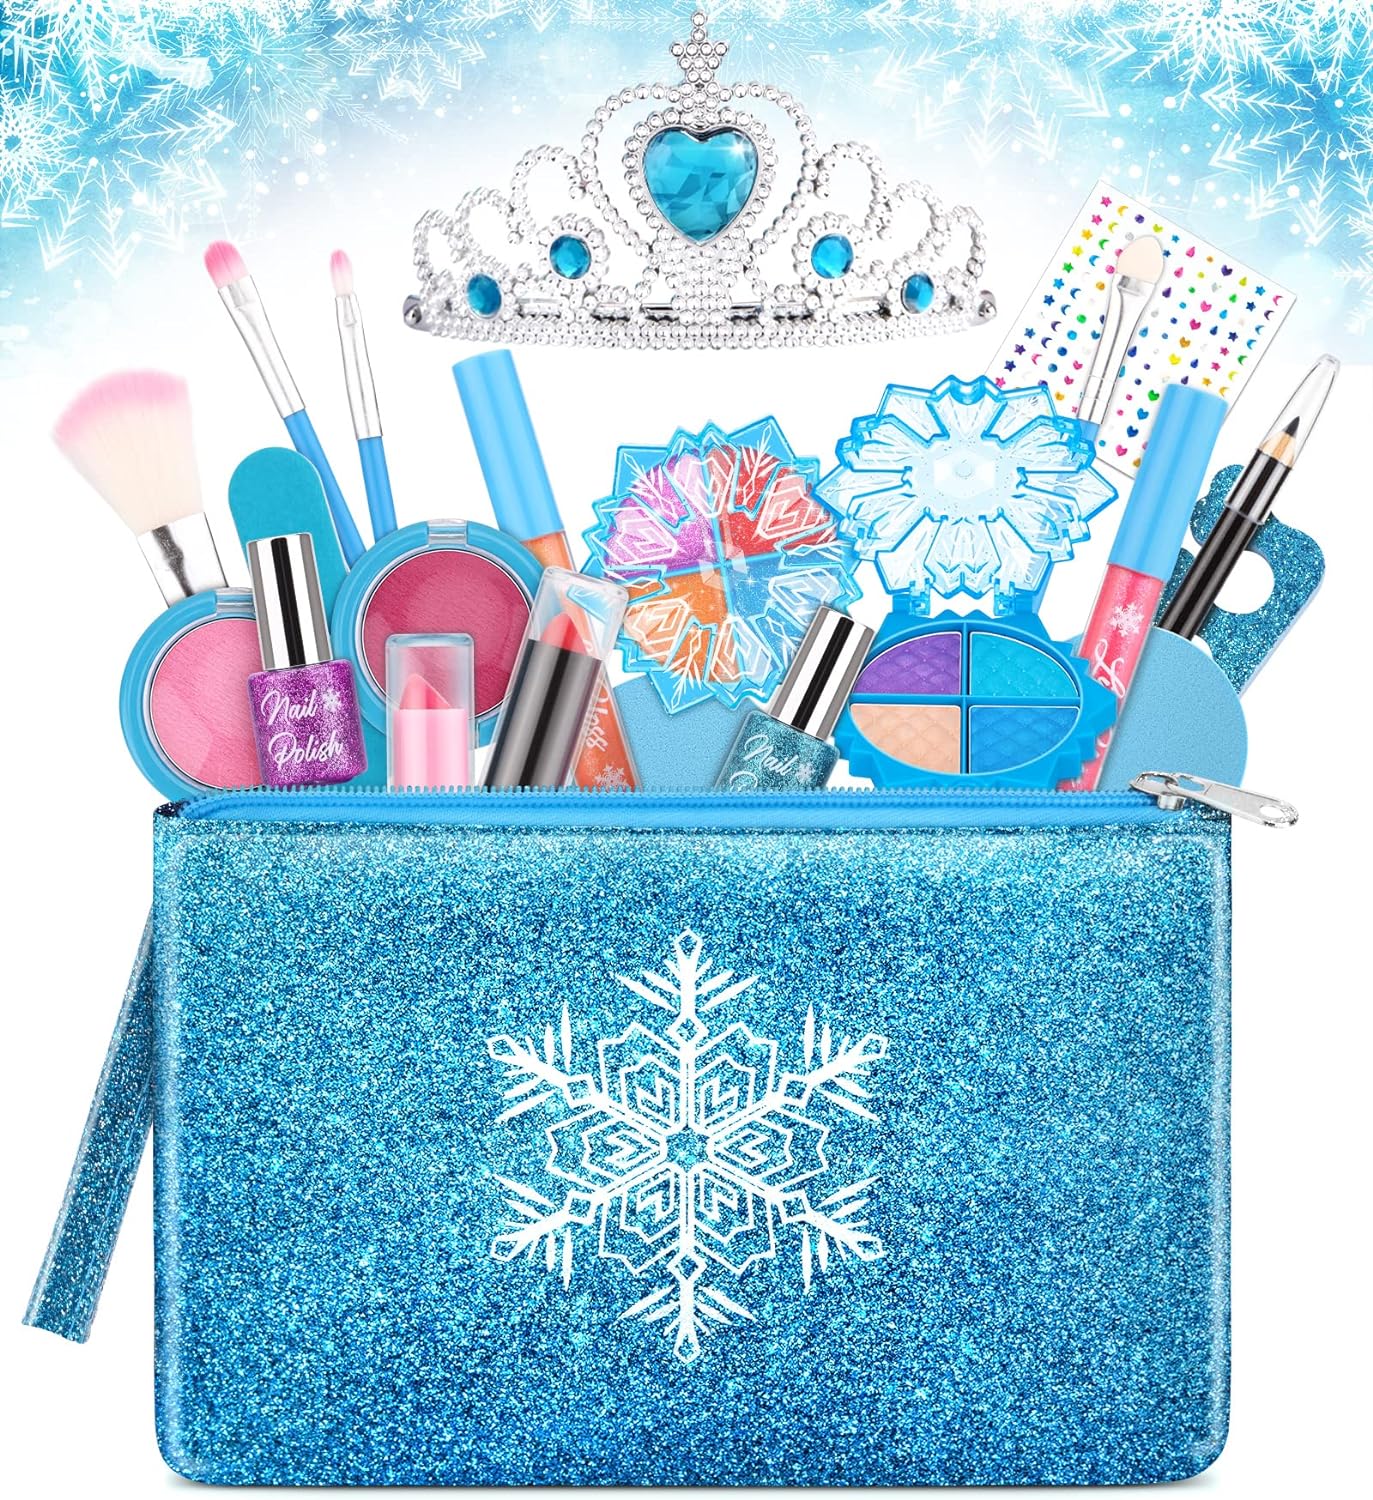 Kids Makeup Kit for Girls, Washable Real Makeup Set for Little Girls, Princess Frozen Toys for Girls Toys for 7 8 Year Old, Kids Play Makeup Starter Kit Cosmetic Beauty Set Frozen Makeup Set - image 1 of 3